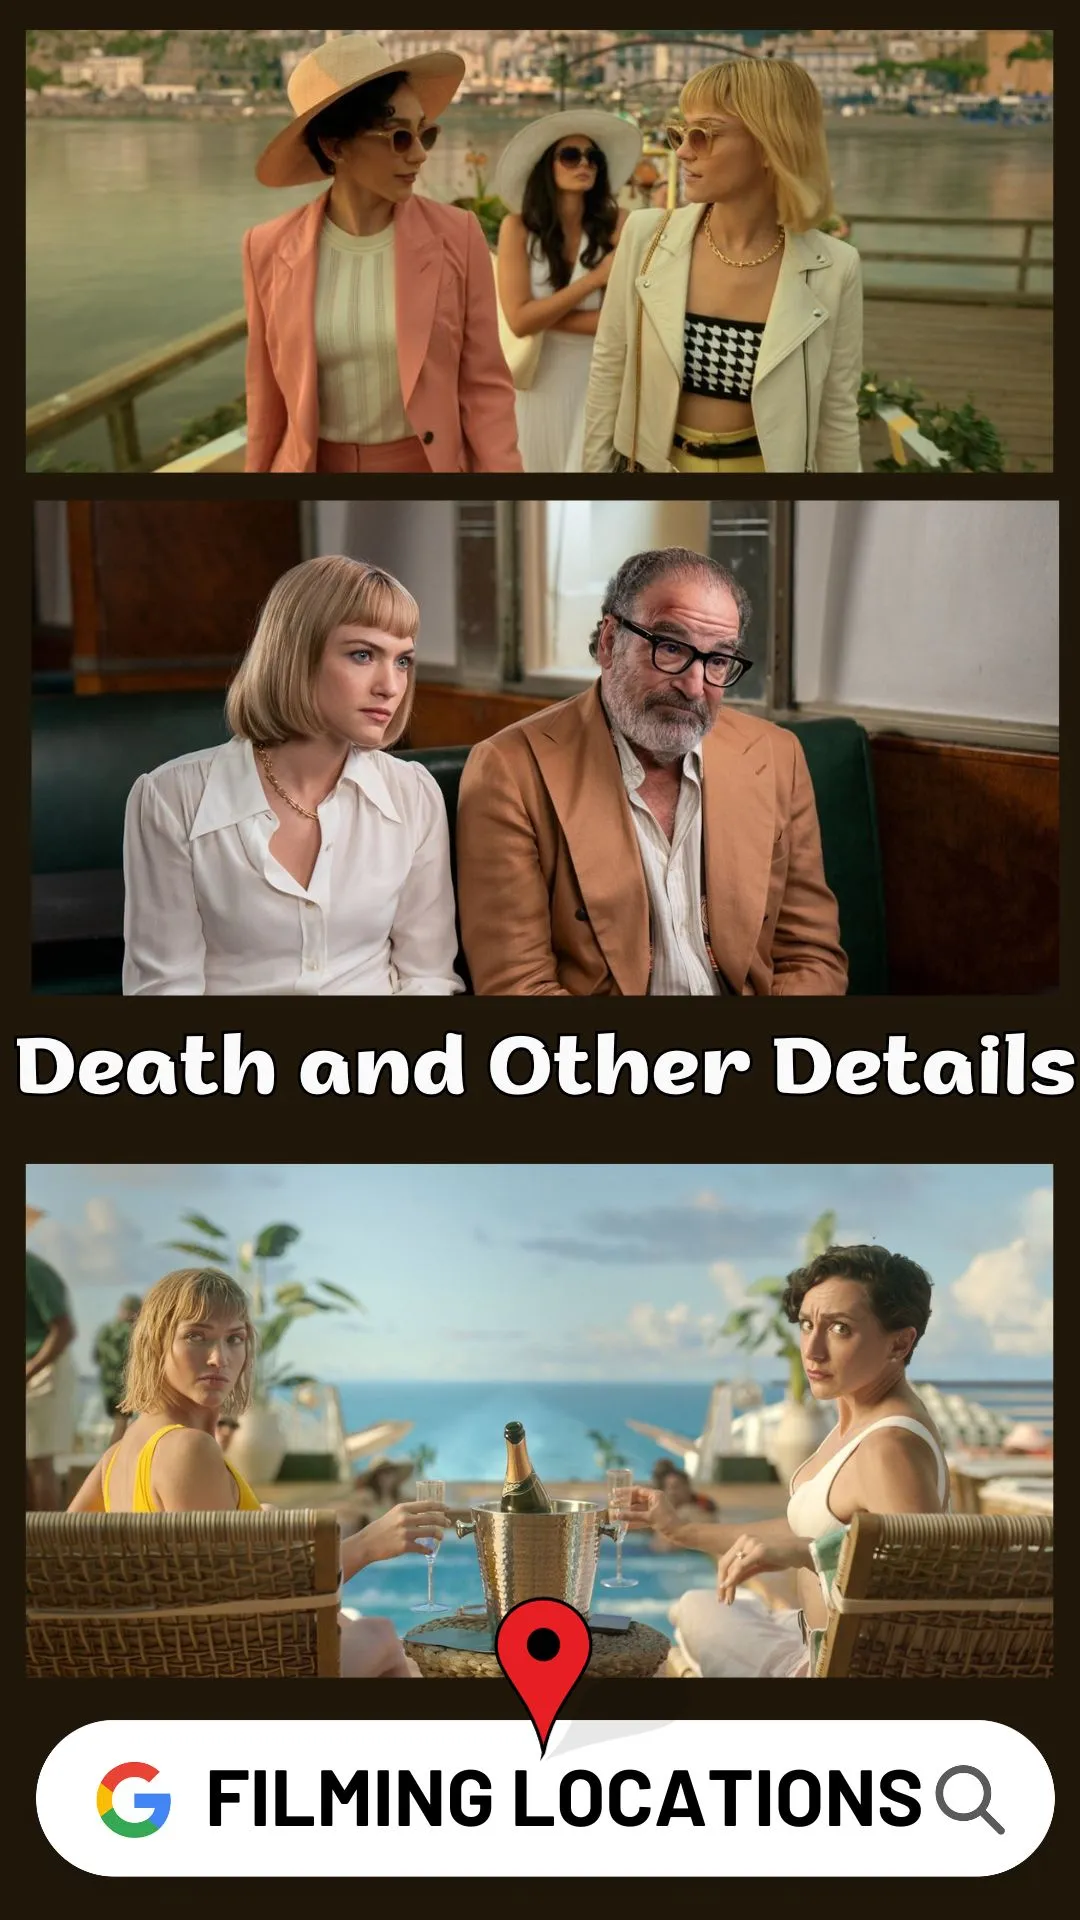 Death and Other Details Filming Locations